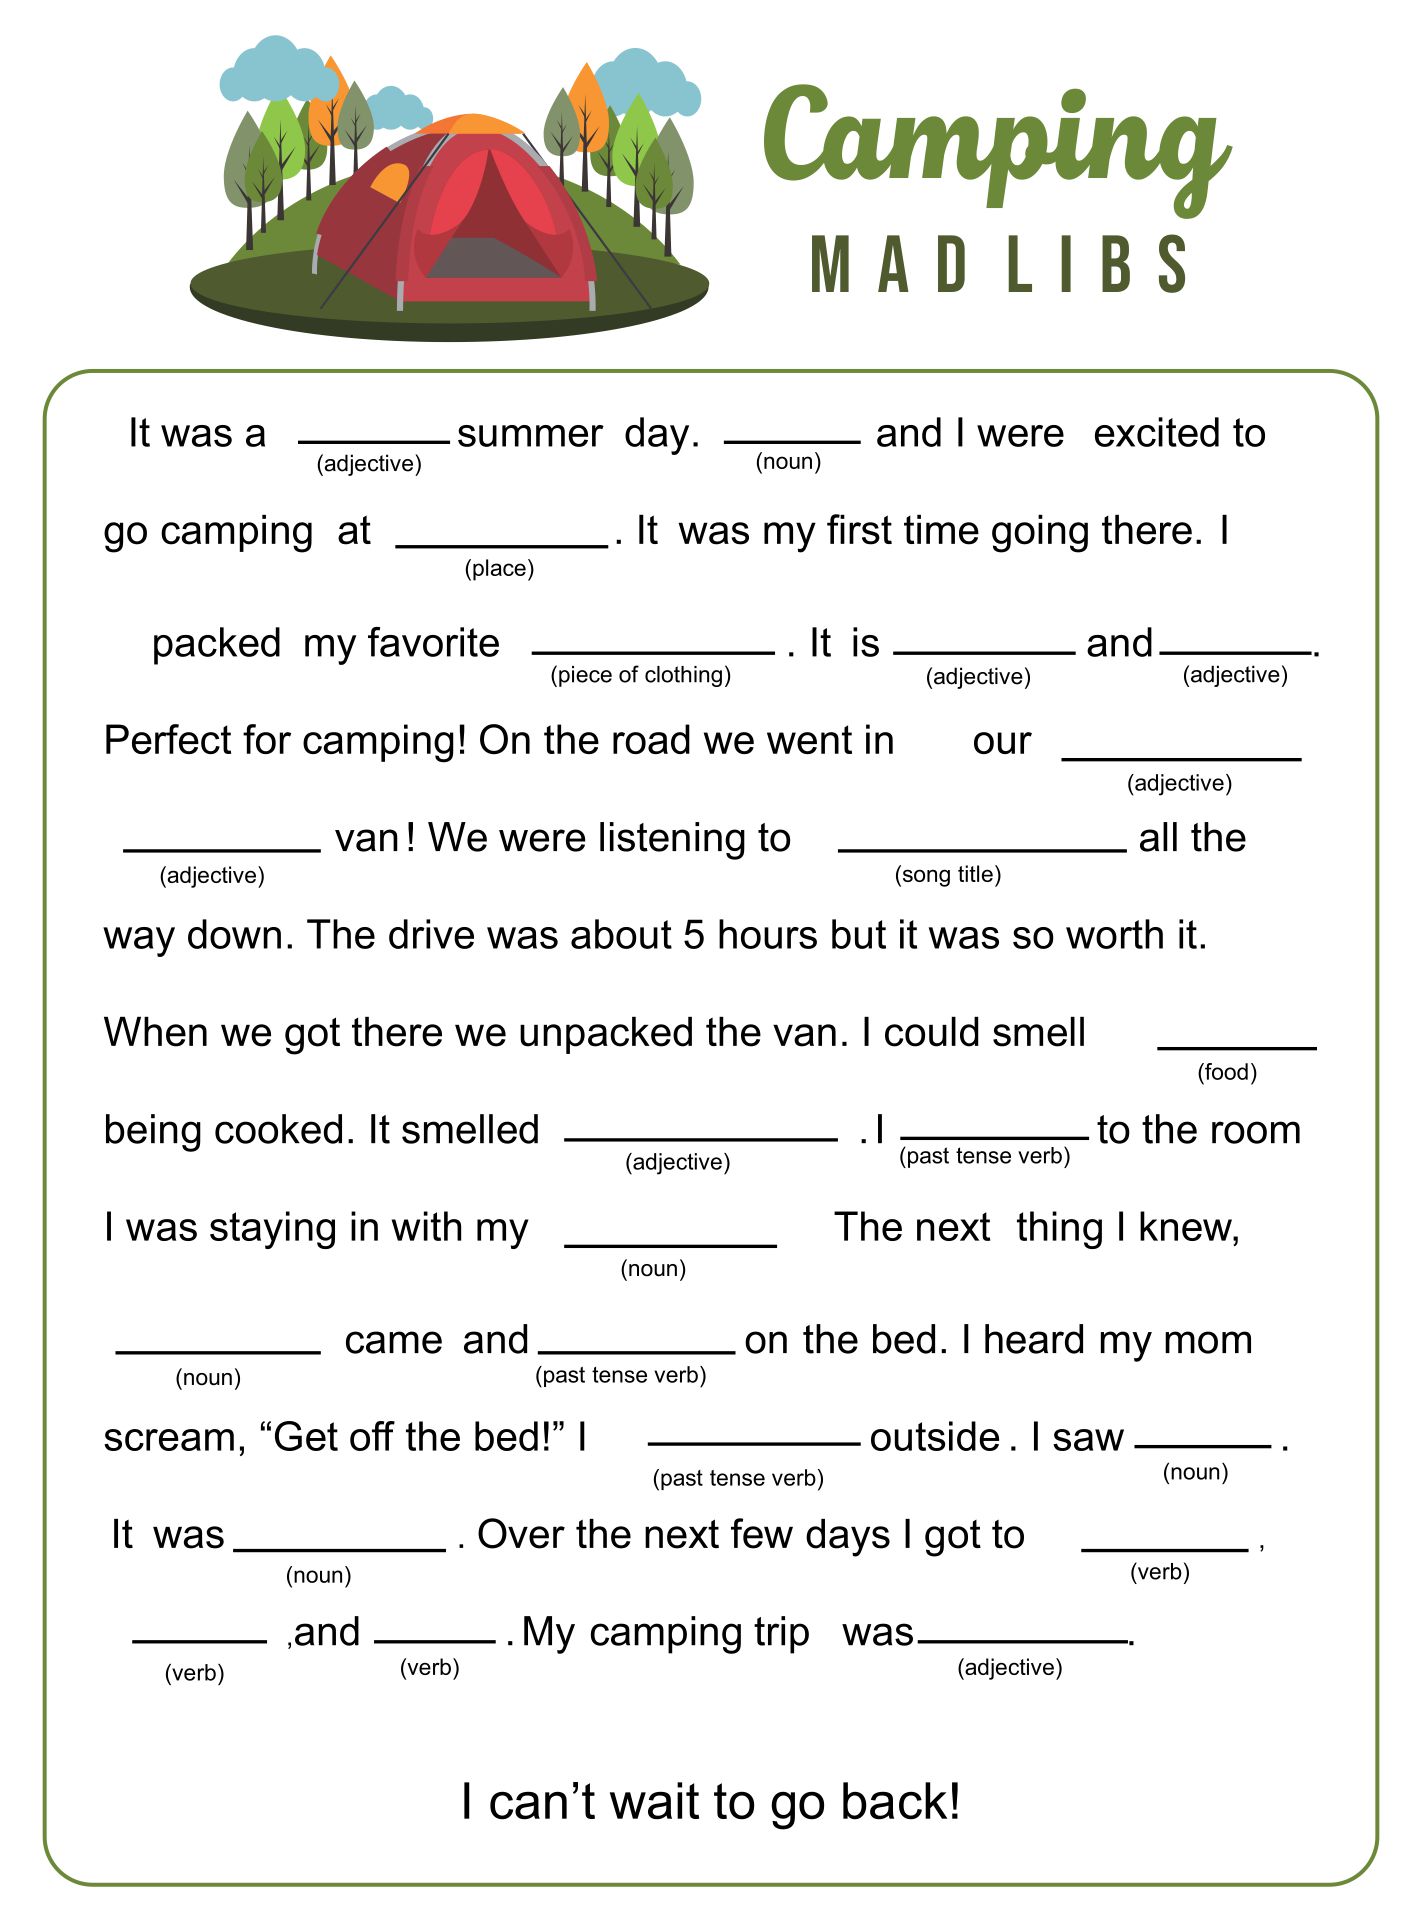 8 Best Images of Camping Mad Libs Printable Free Printable Camping